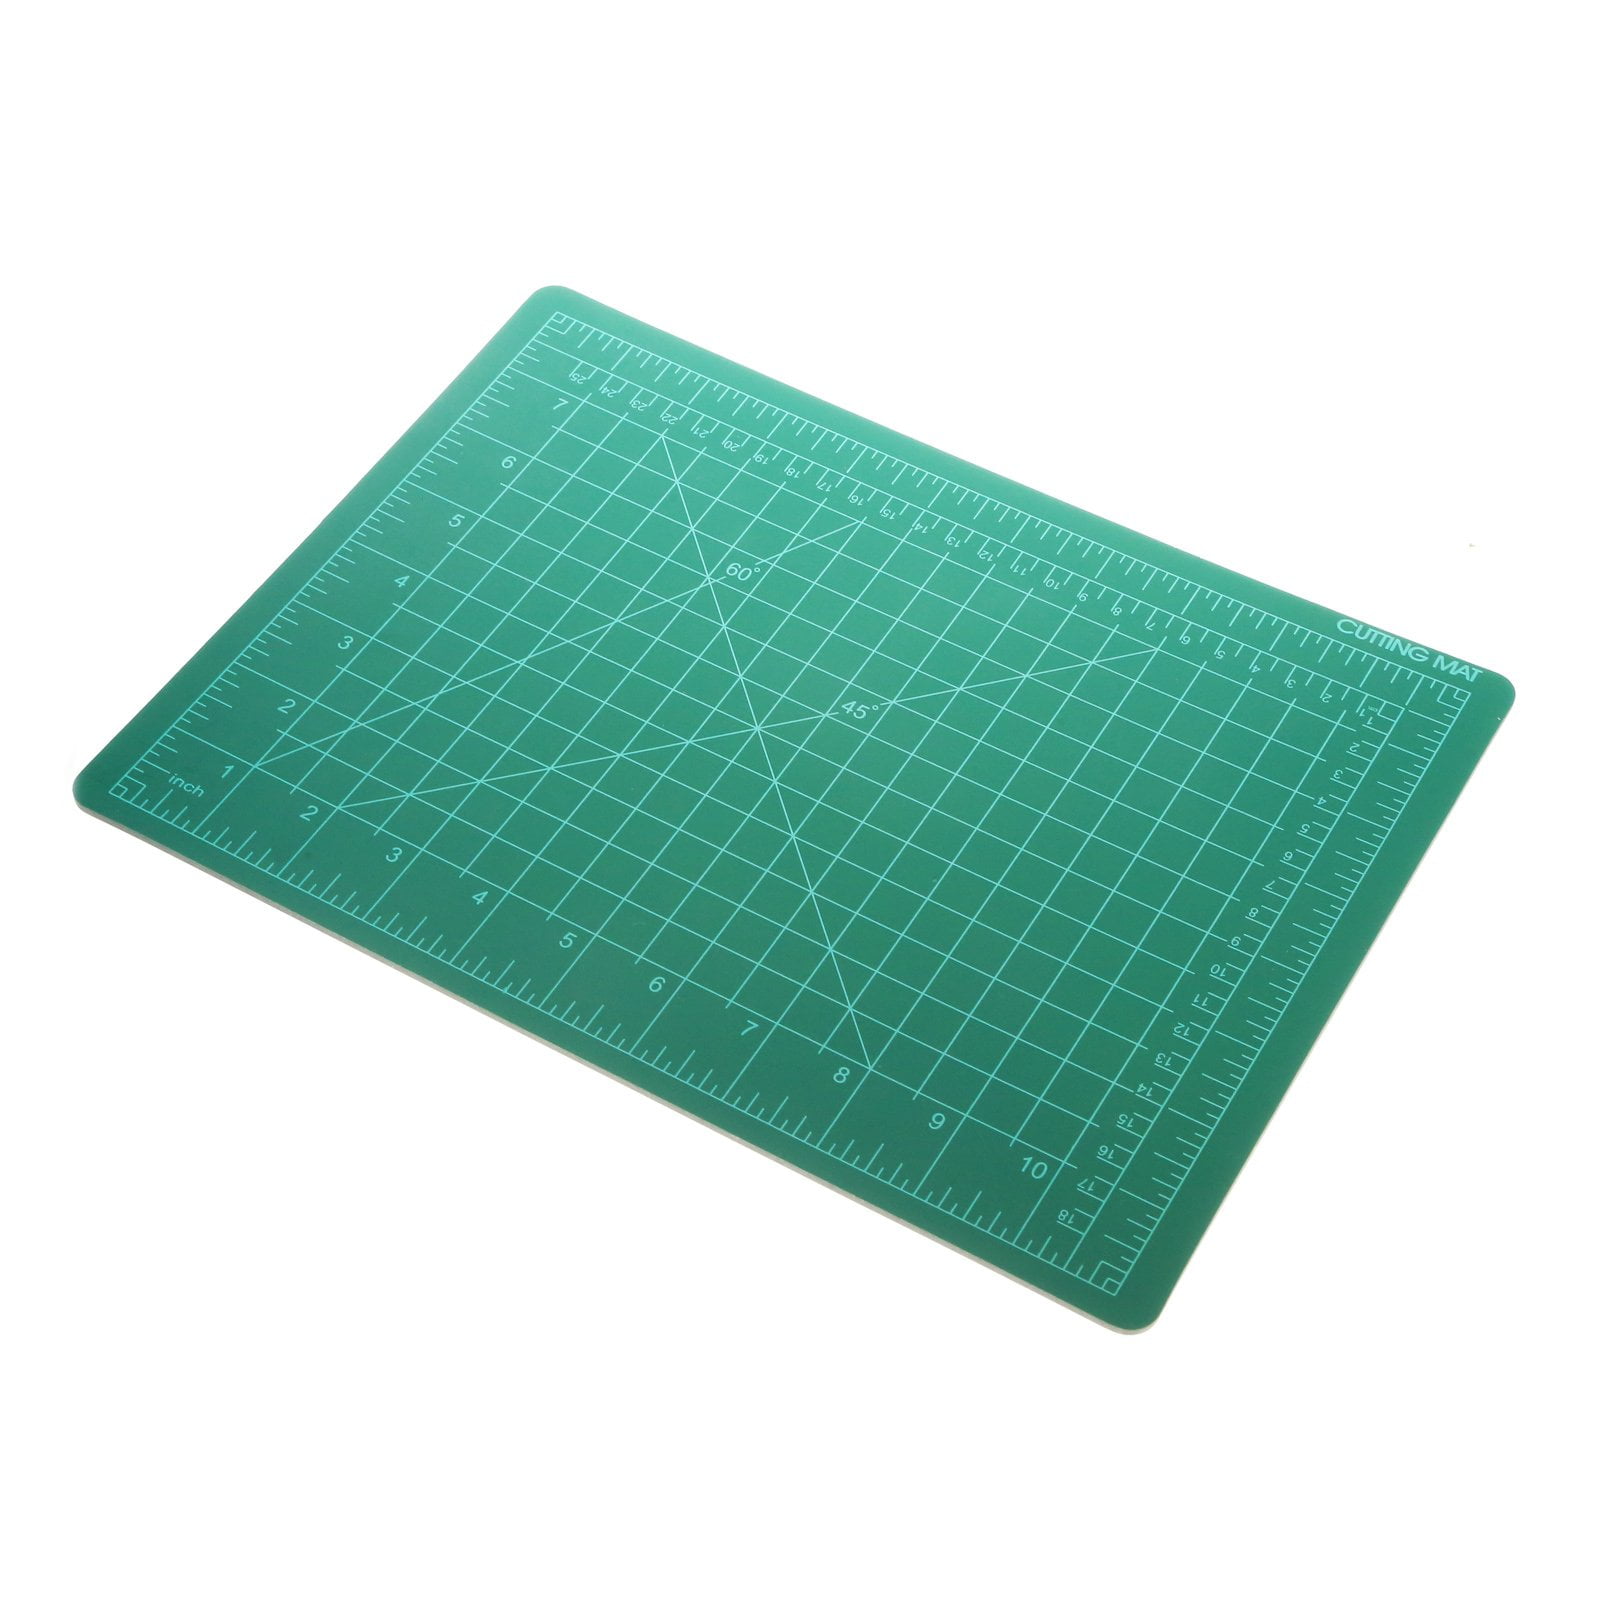 Cricut Self Healing Mat 12x12 for Crafting DIY Projects DIY Crafting &  Hobby Store